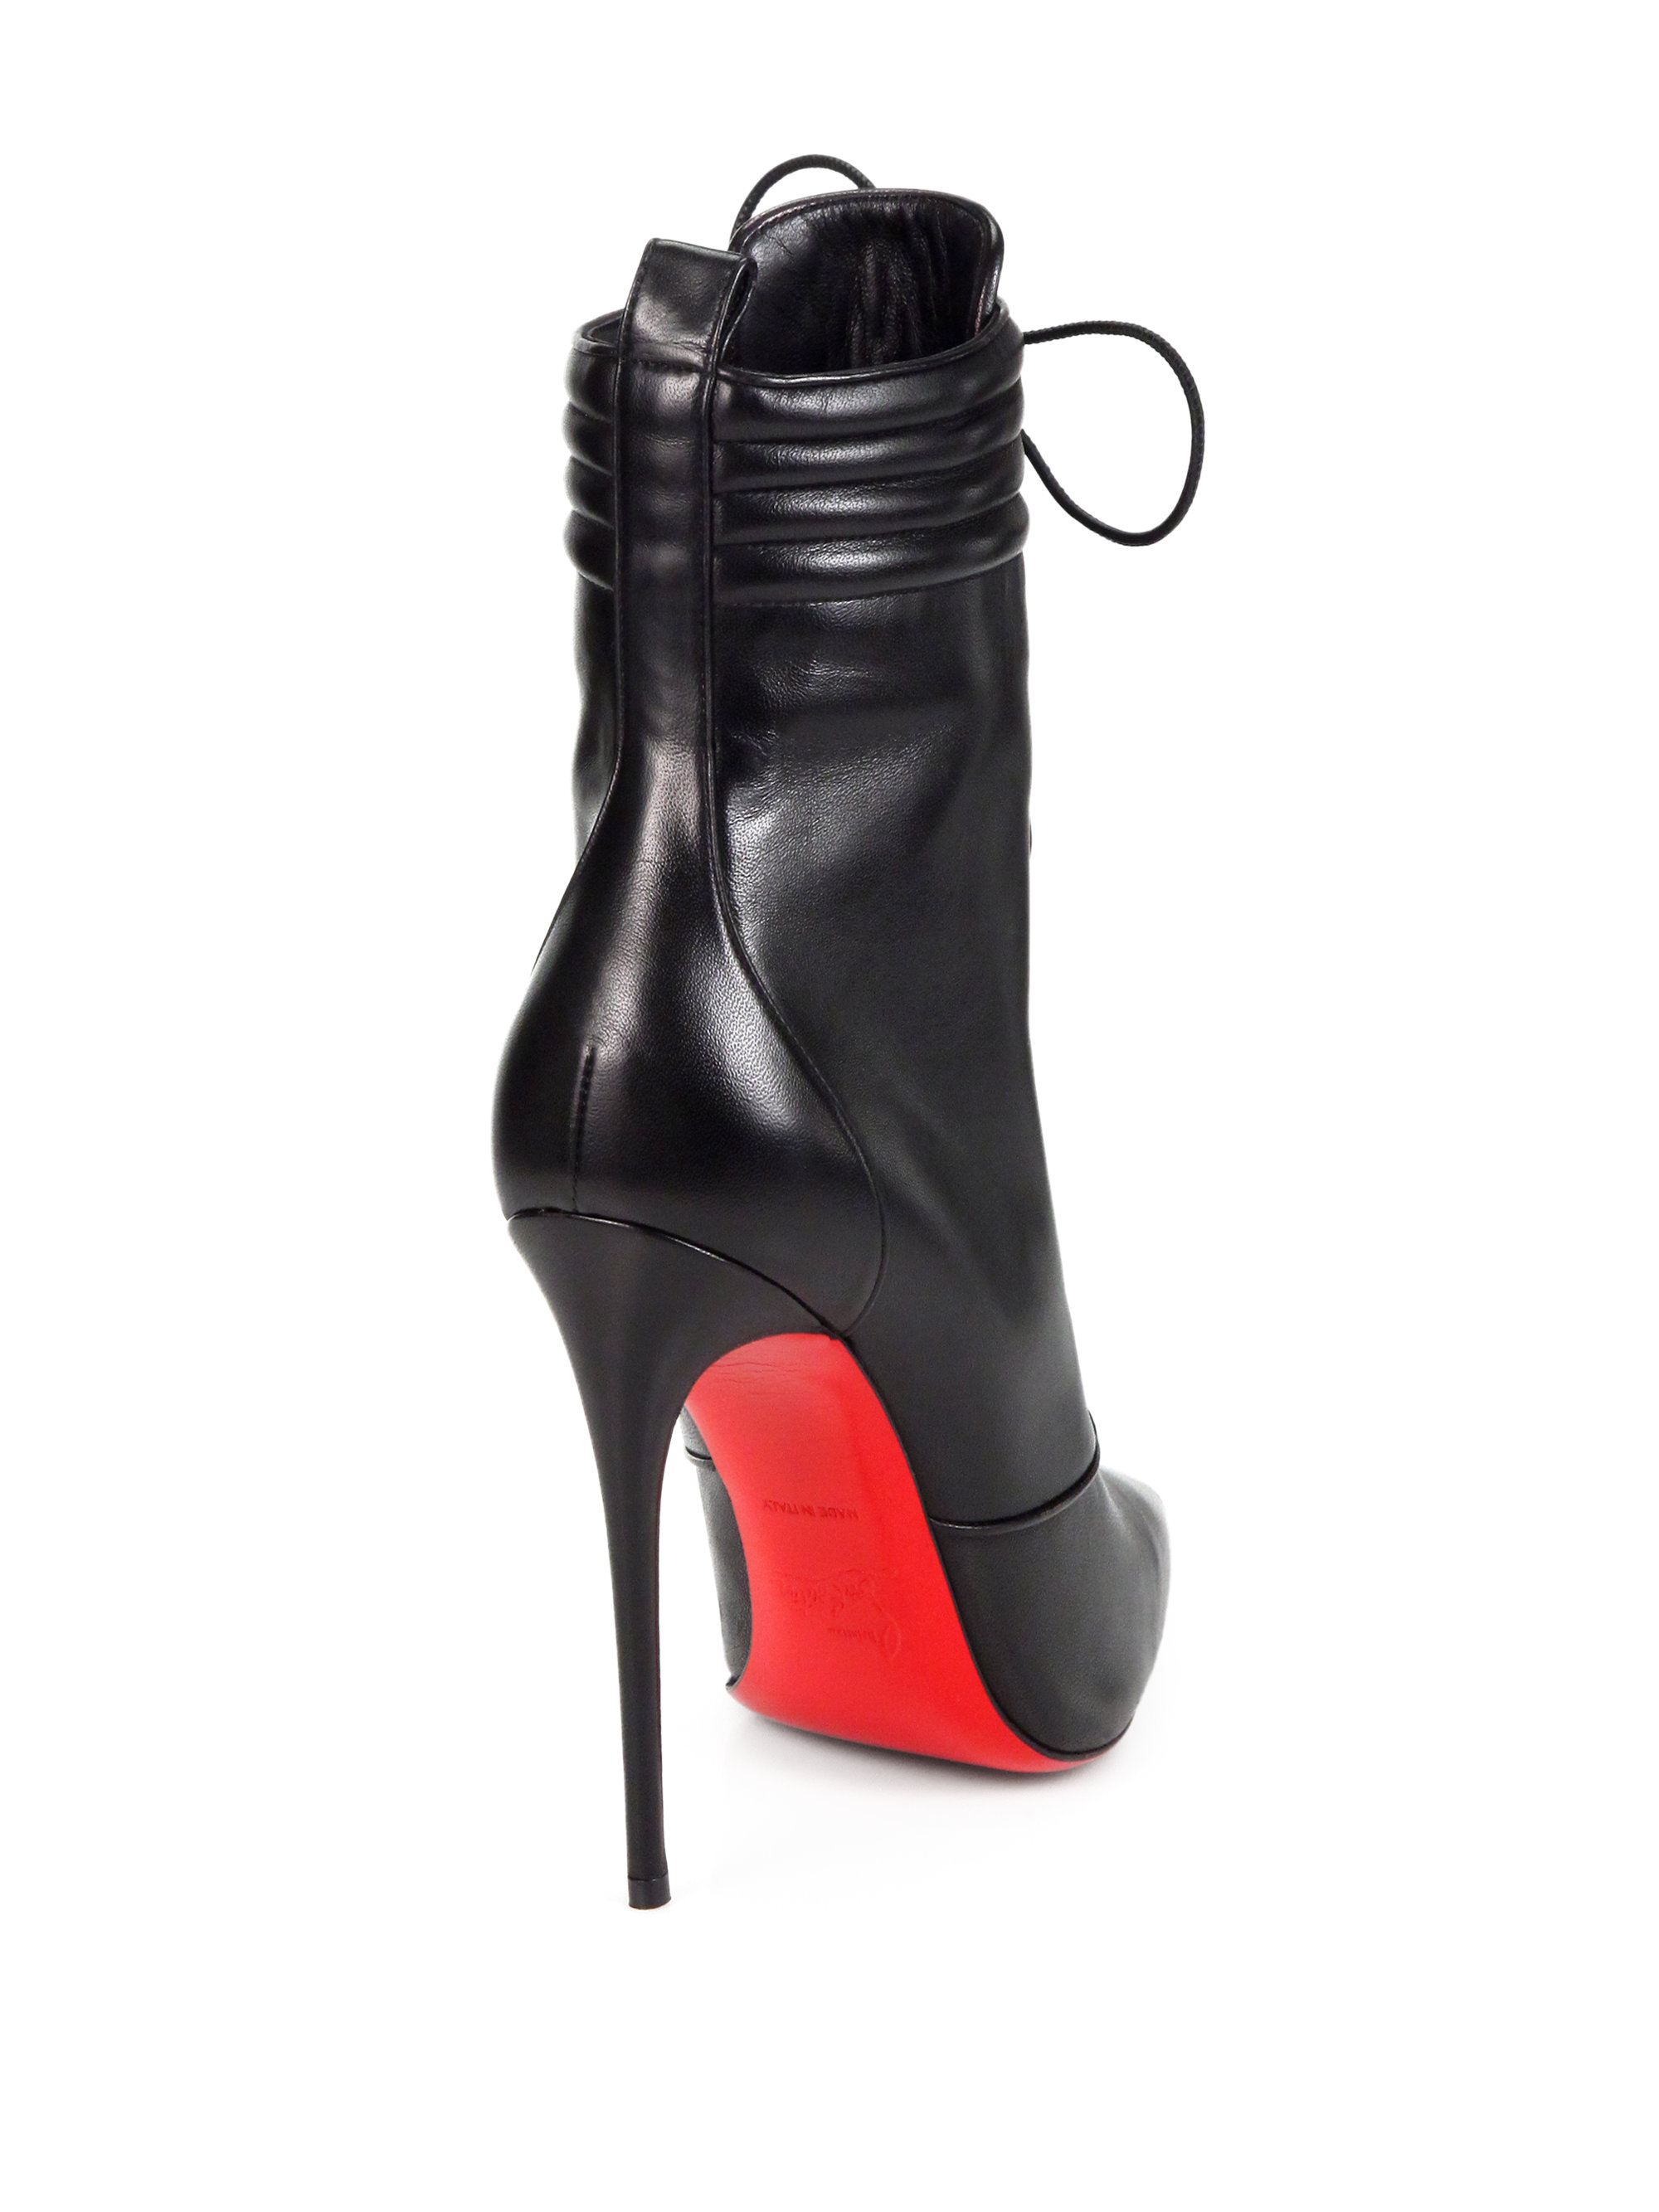 Lyst - Christian Louboutin Mado Leather Lace up Ankle Boots in Black